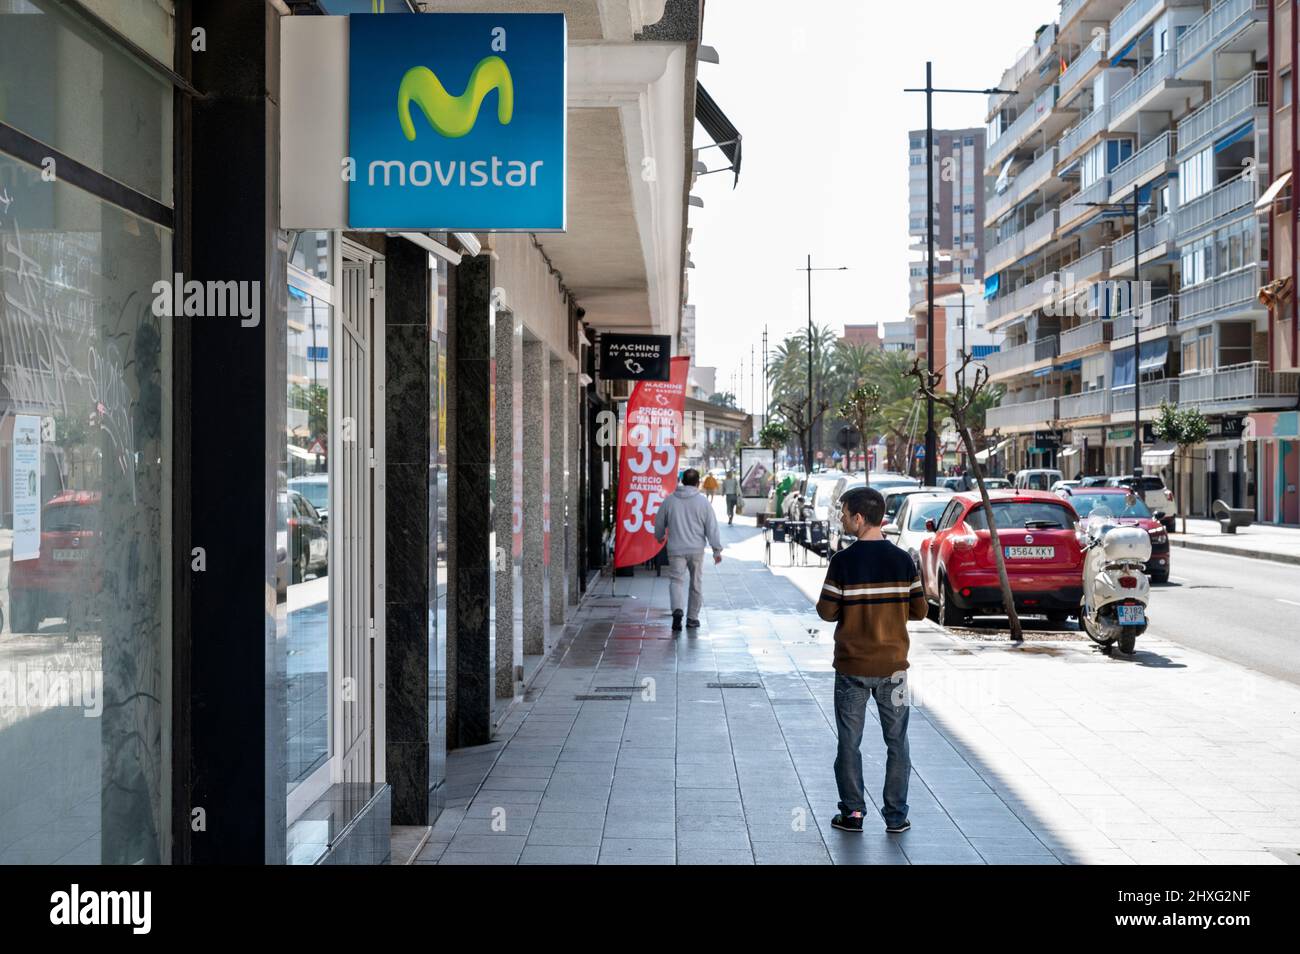 A pedestrian stands in front of the Spanish telecommunications brand owned by Telefonica and largest mobile phone operator, Movistar, store seen in Spain. Stock Photo